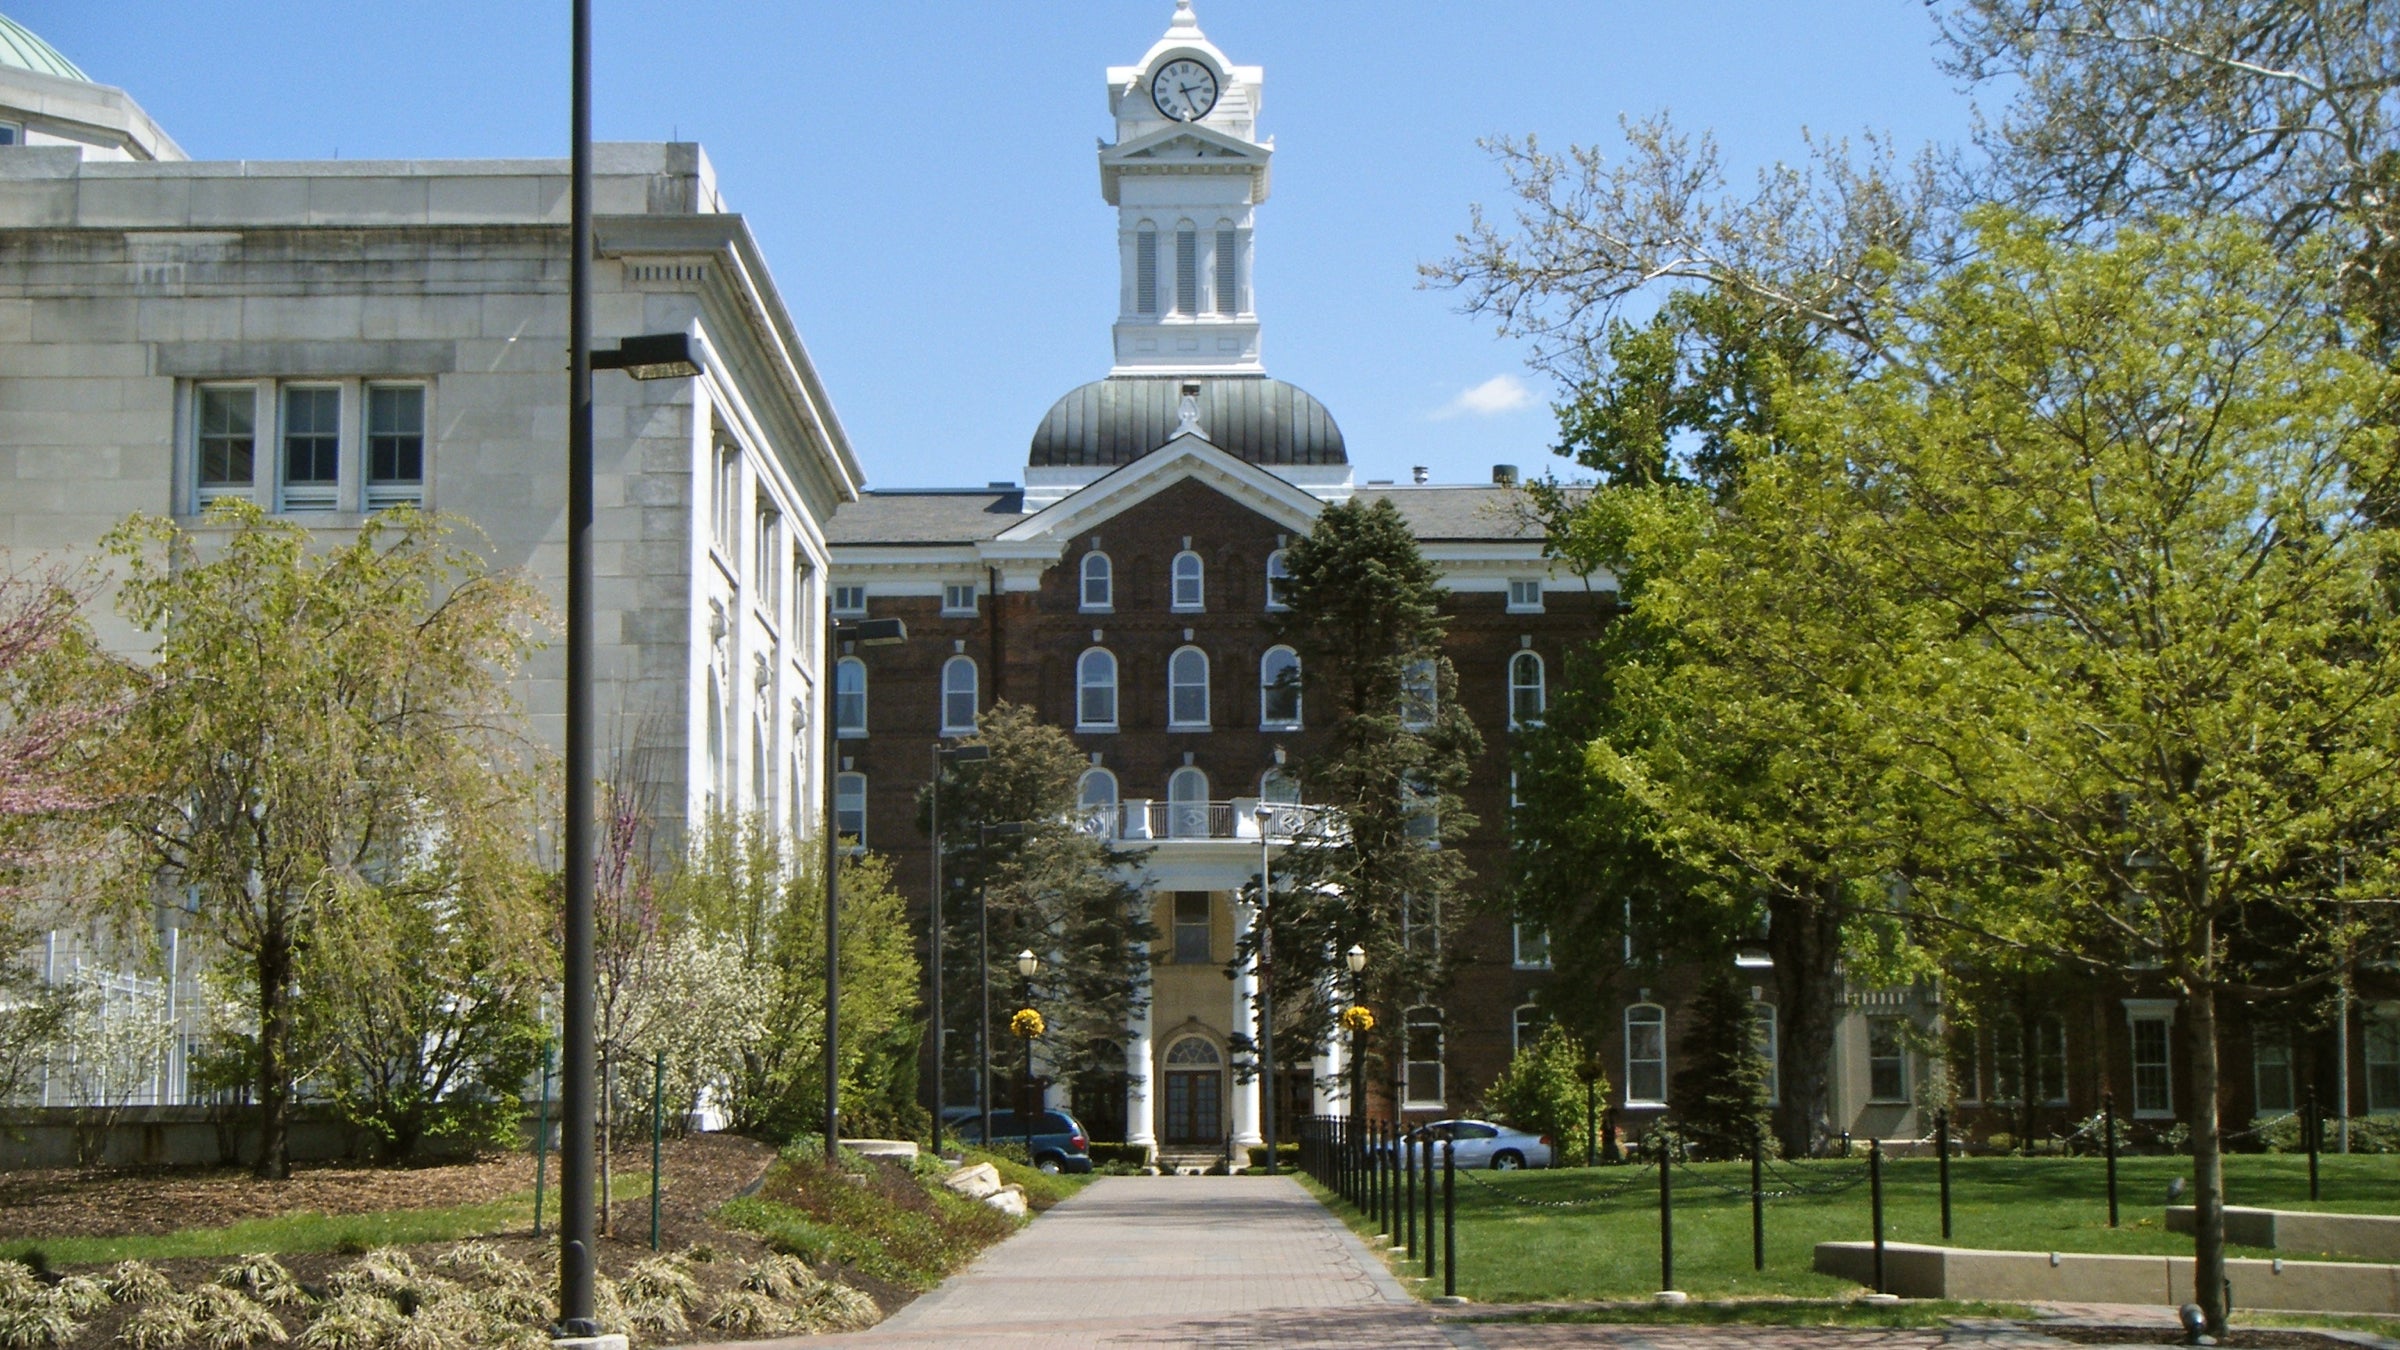 Pennsylvania's state-owned universities like Kutztown are being considered for mergers or closures. (Dough4872/Wikimedia Commons)